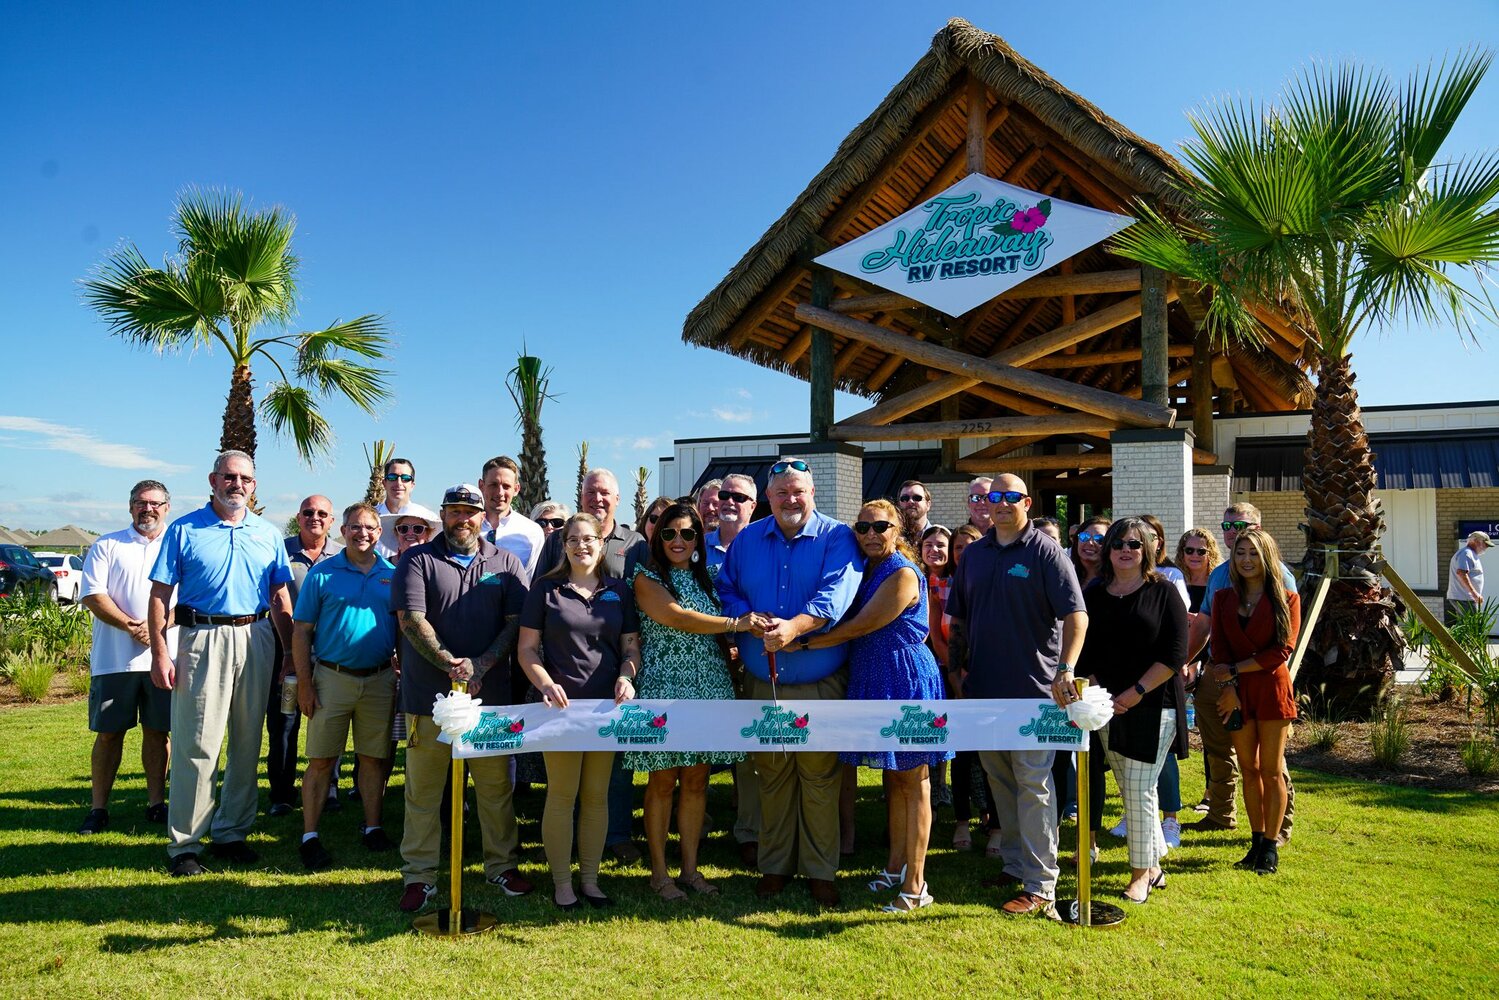 OWA Parks & Resort cut the ribbon on its newest addition, Tropic Hideaway RV Resort.